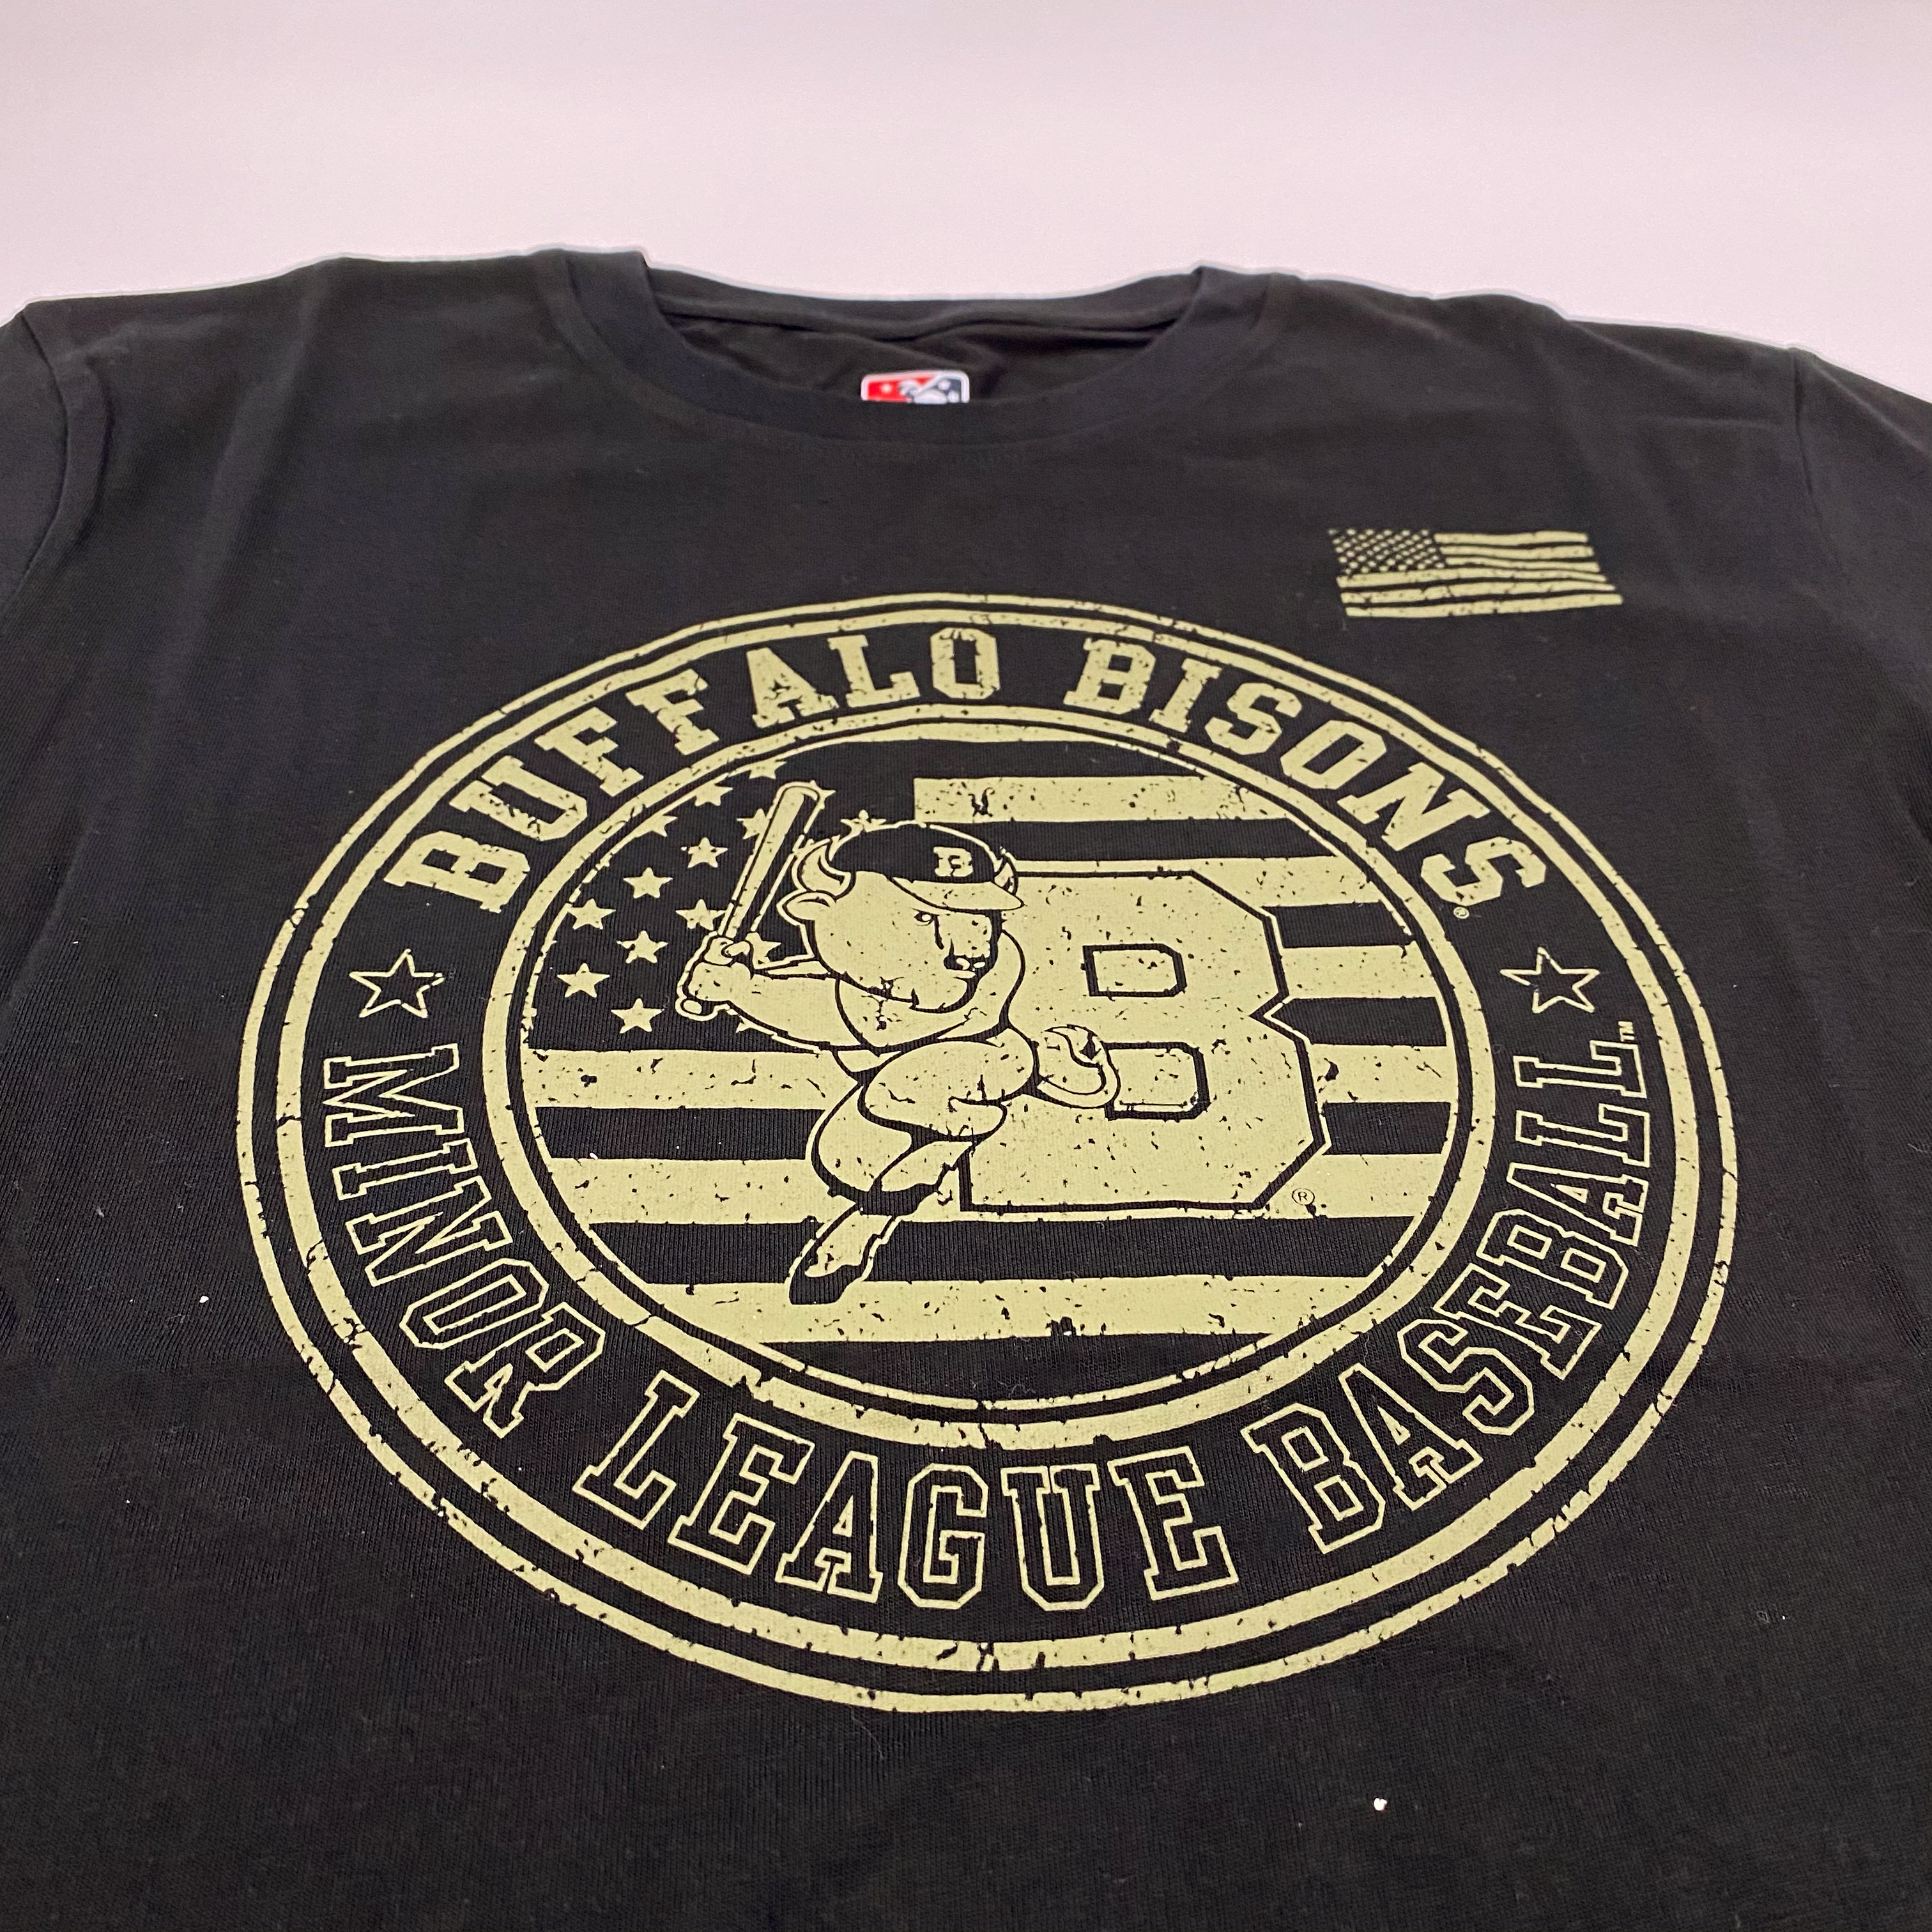 New T-Shirt The BFLO Armed Bisons Forces | Era Buffalo Store Black